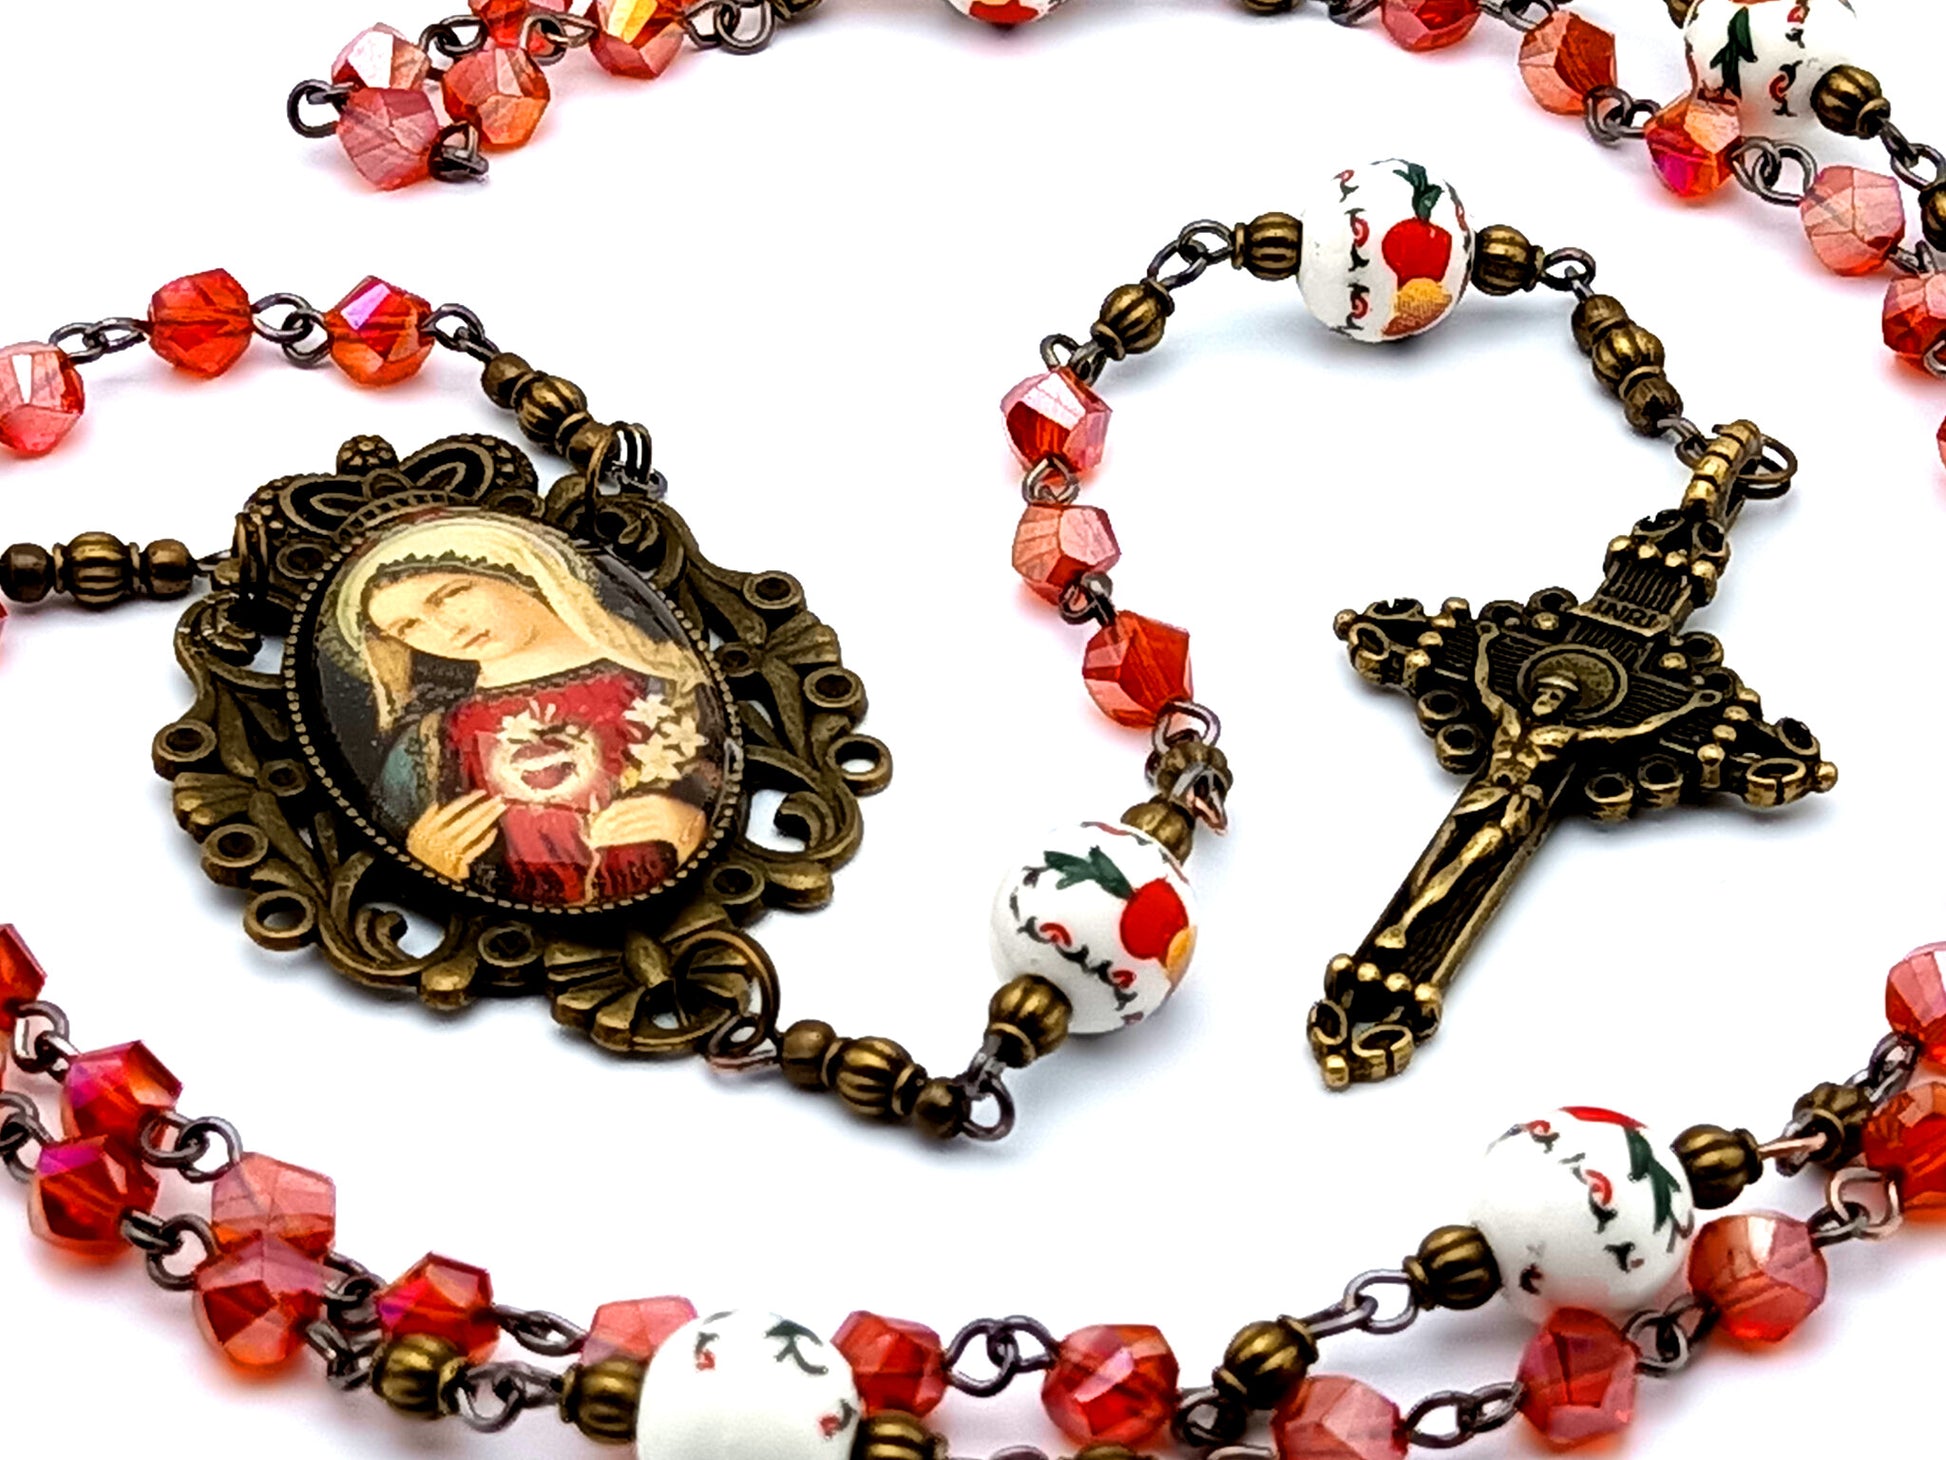 Vintage style Immaculate Heart of Mary unique rosary beads with glass and porcelain beads and brass crucifix.